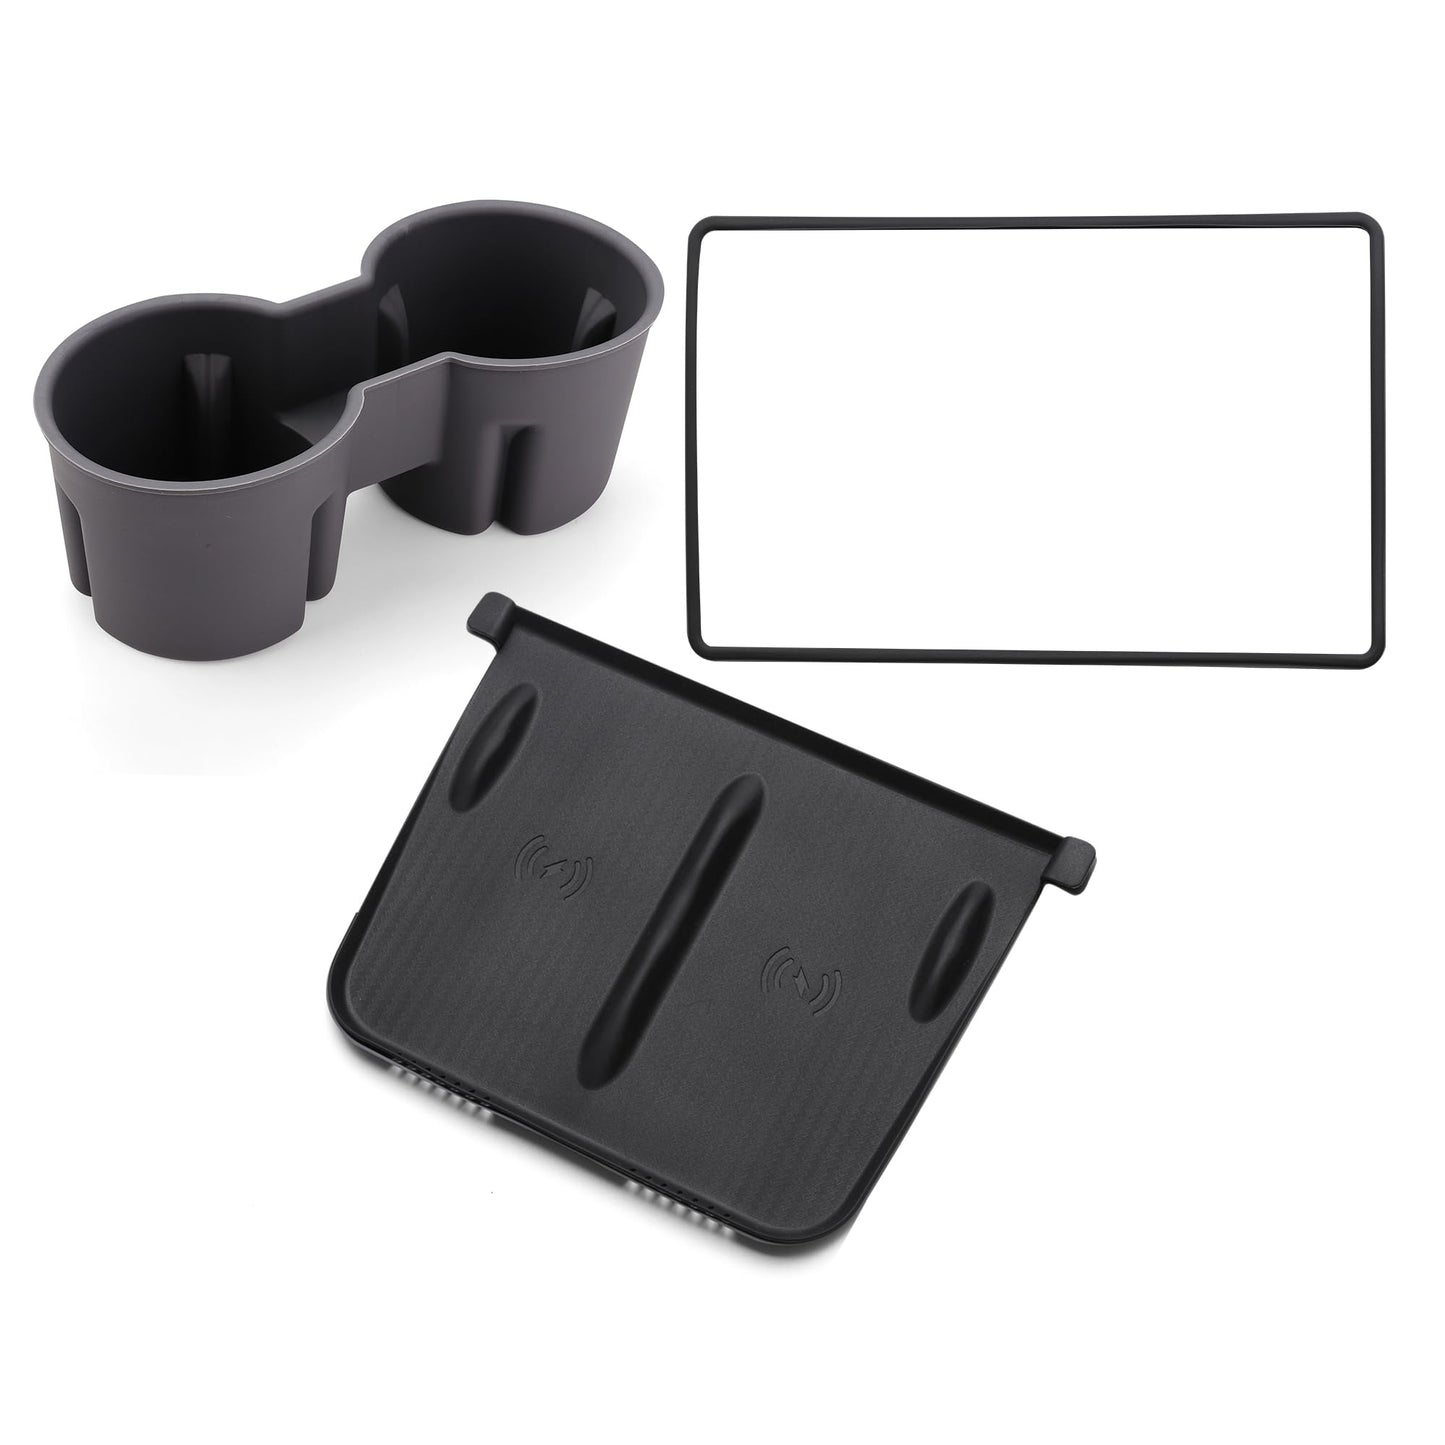 Cup Holders Screen Edge Protector Wireless Charger Mat Silicone 3PCS Upgraded Accessories for Model 3/Y